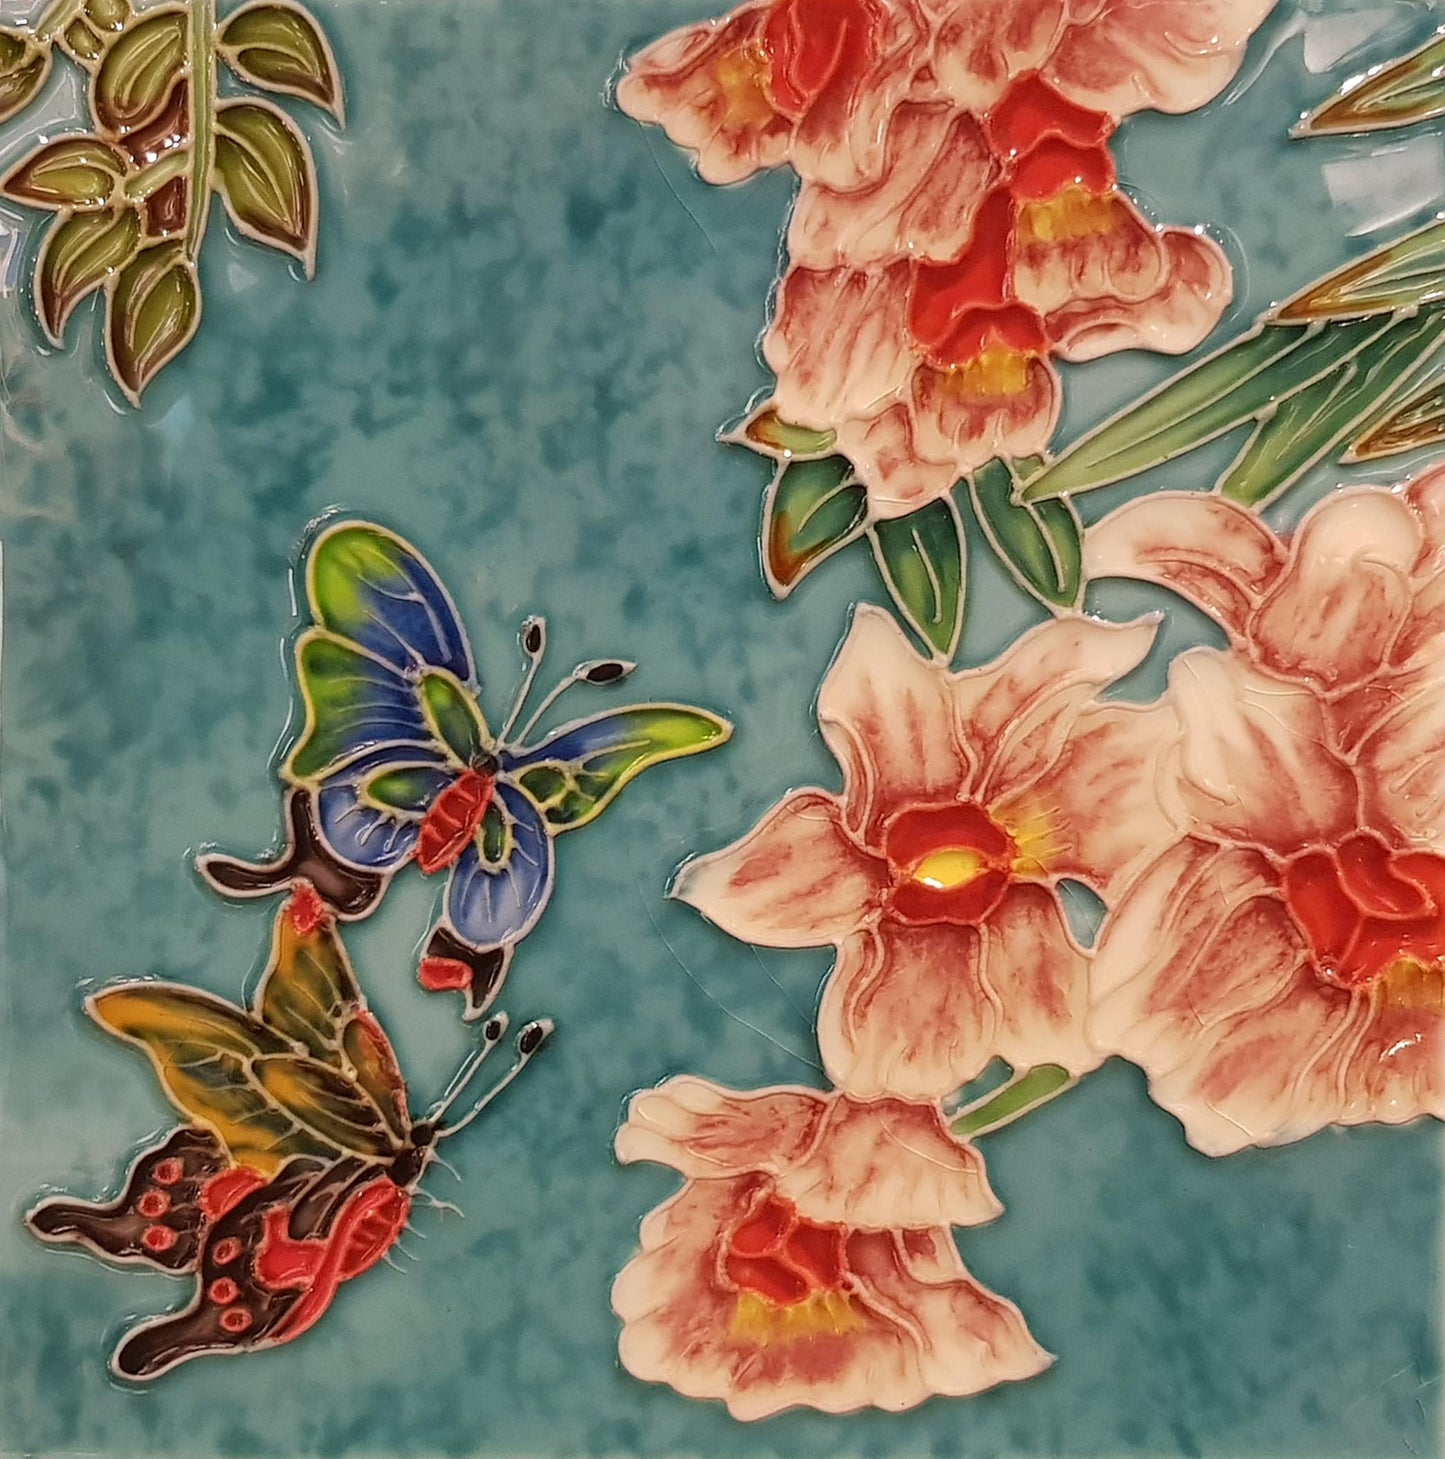 3530 Cherry Blossom and Butterfly 30cm x 30cm Pureland Ceramic Tile